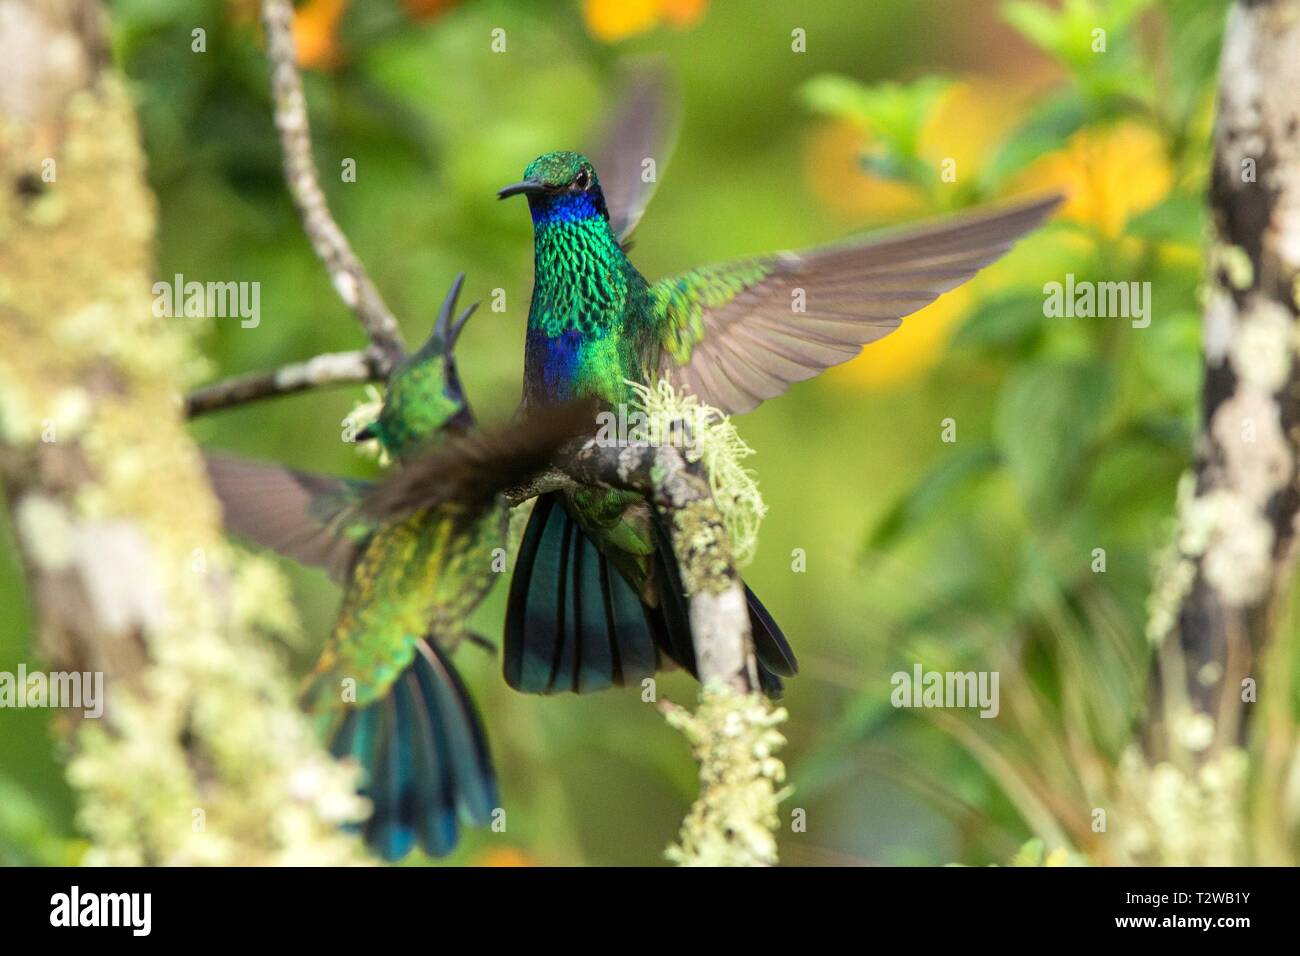 Green violet-ear sitting on branch, hummingbird from tropical forest,Ecuador,bird perching,tiny bird with outstretched wings,clear colorful background Stock Photo